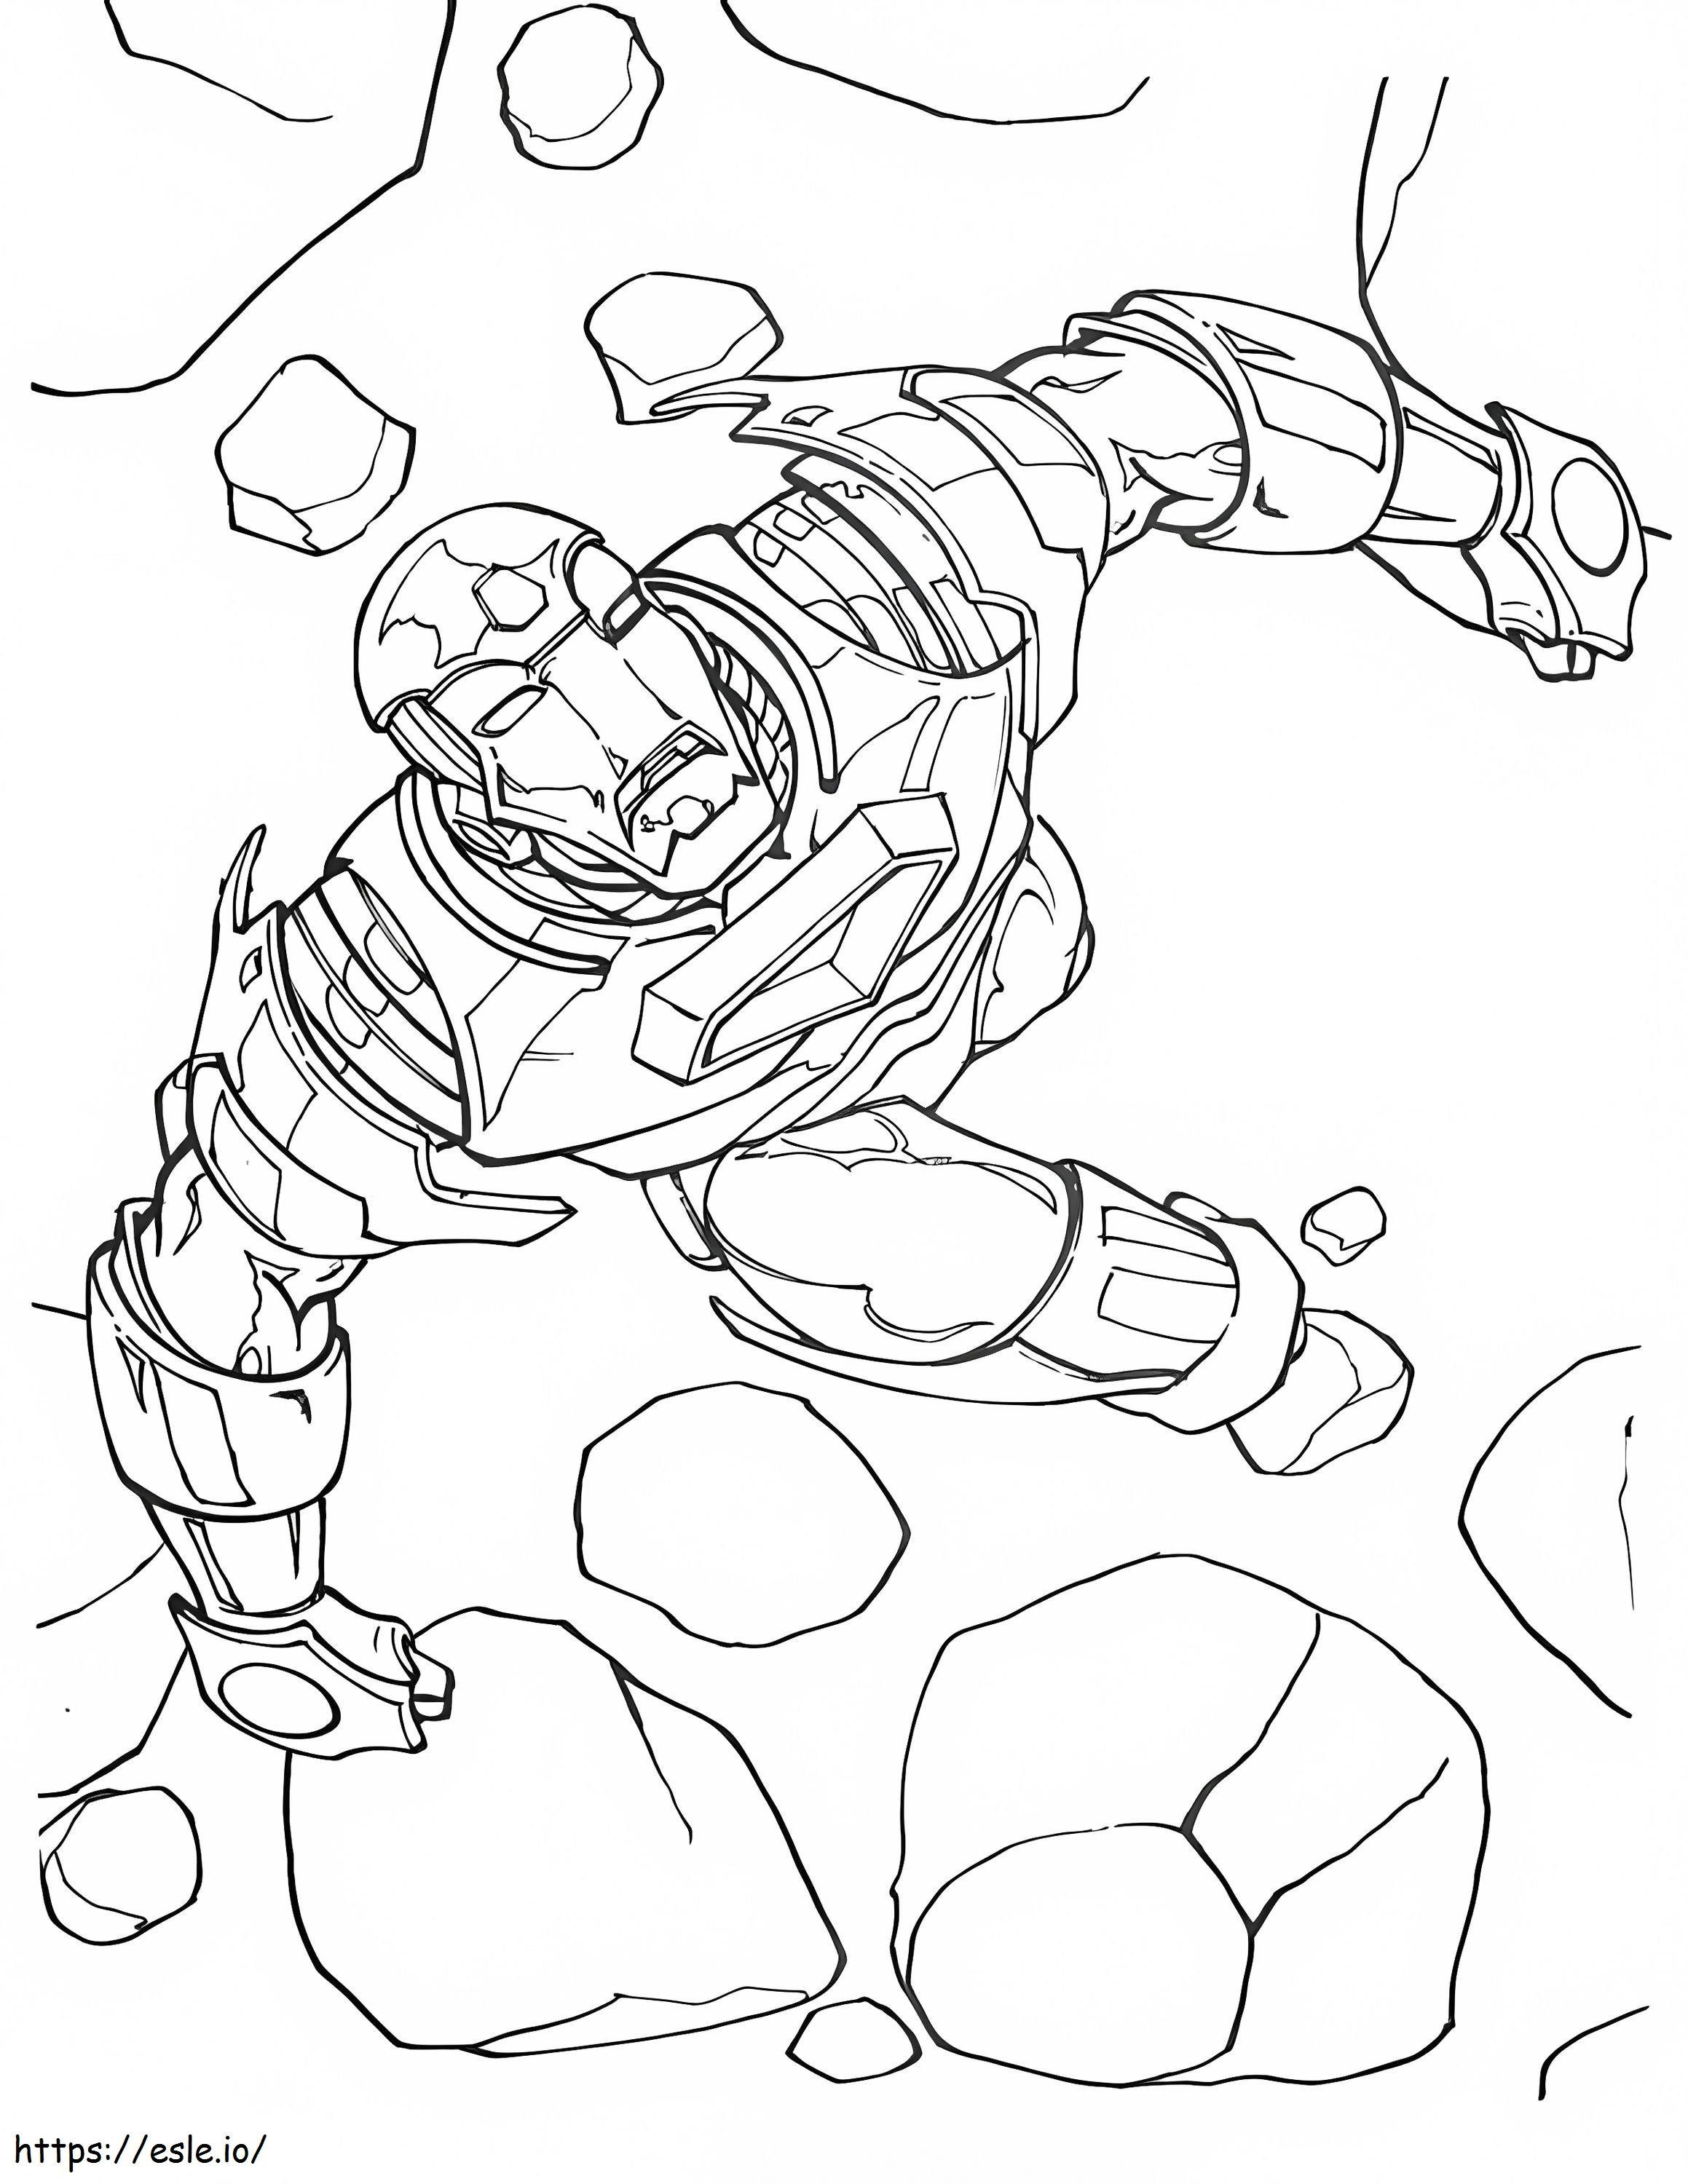 Marvel Iron Man coloring page